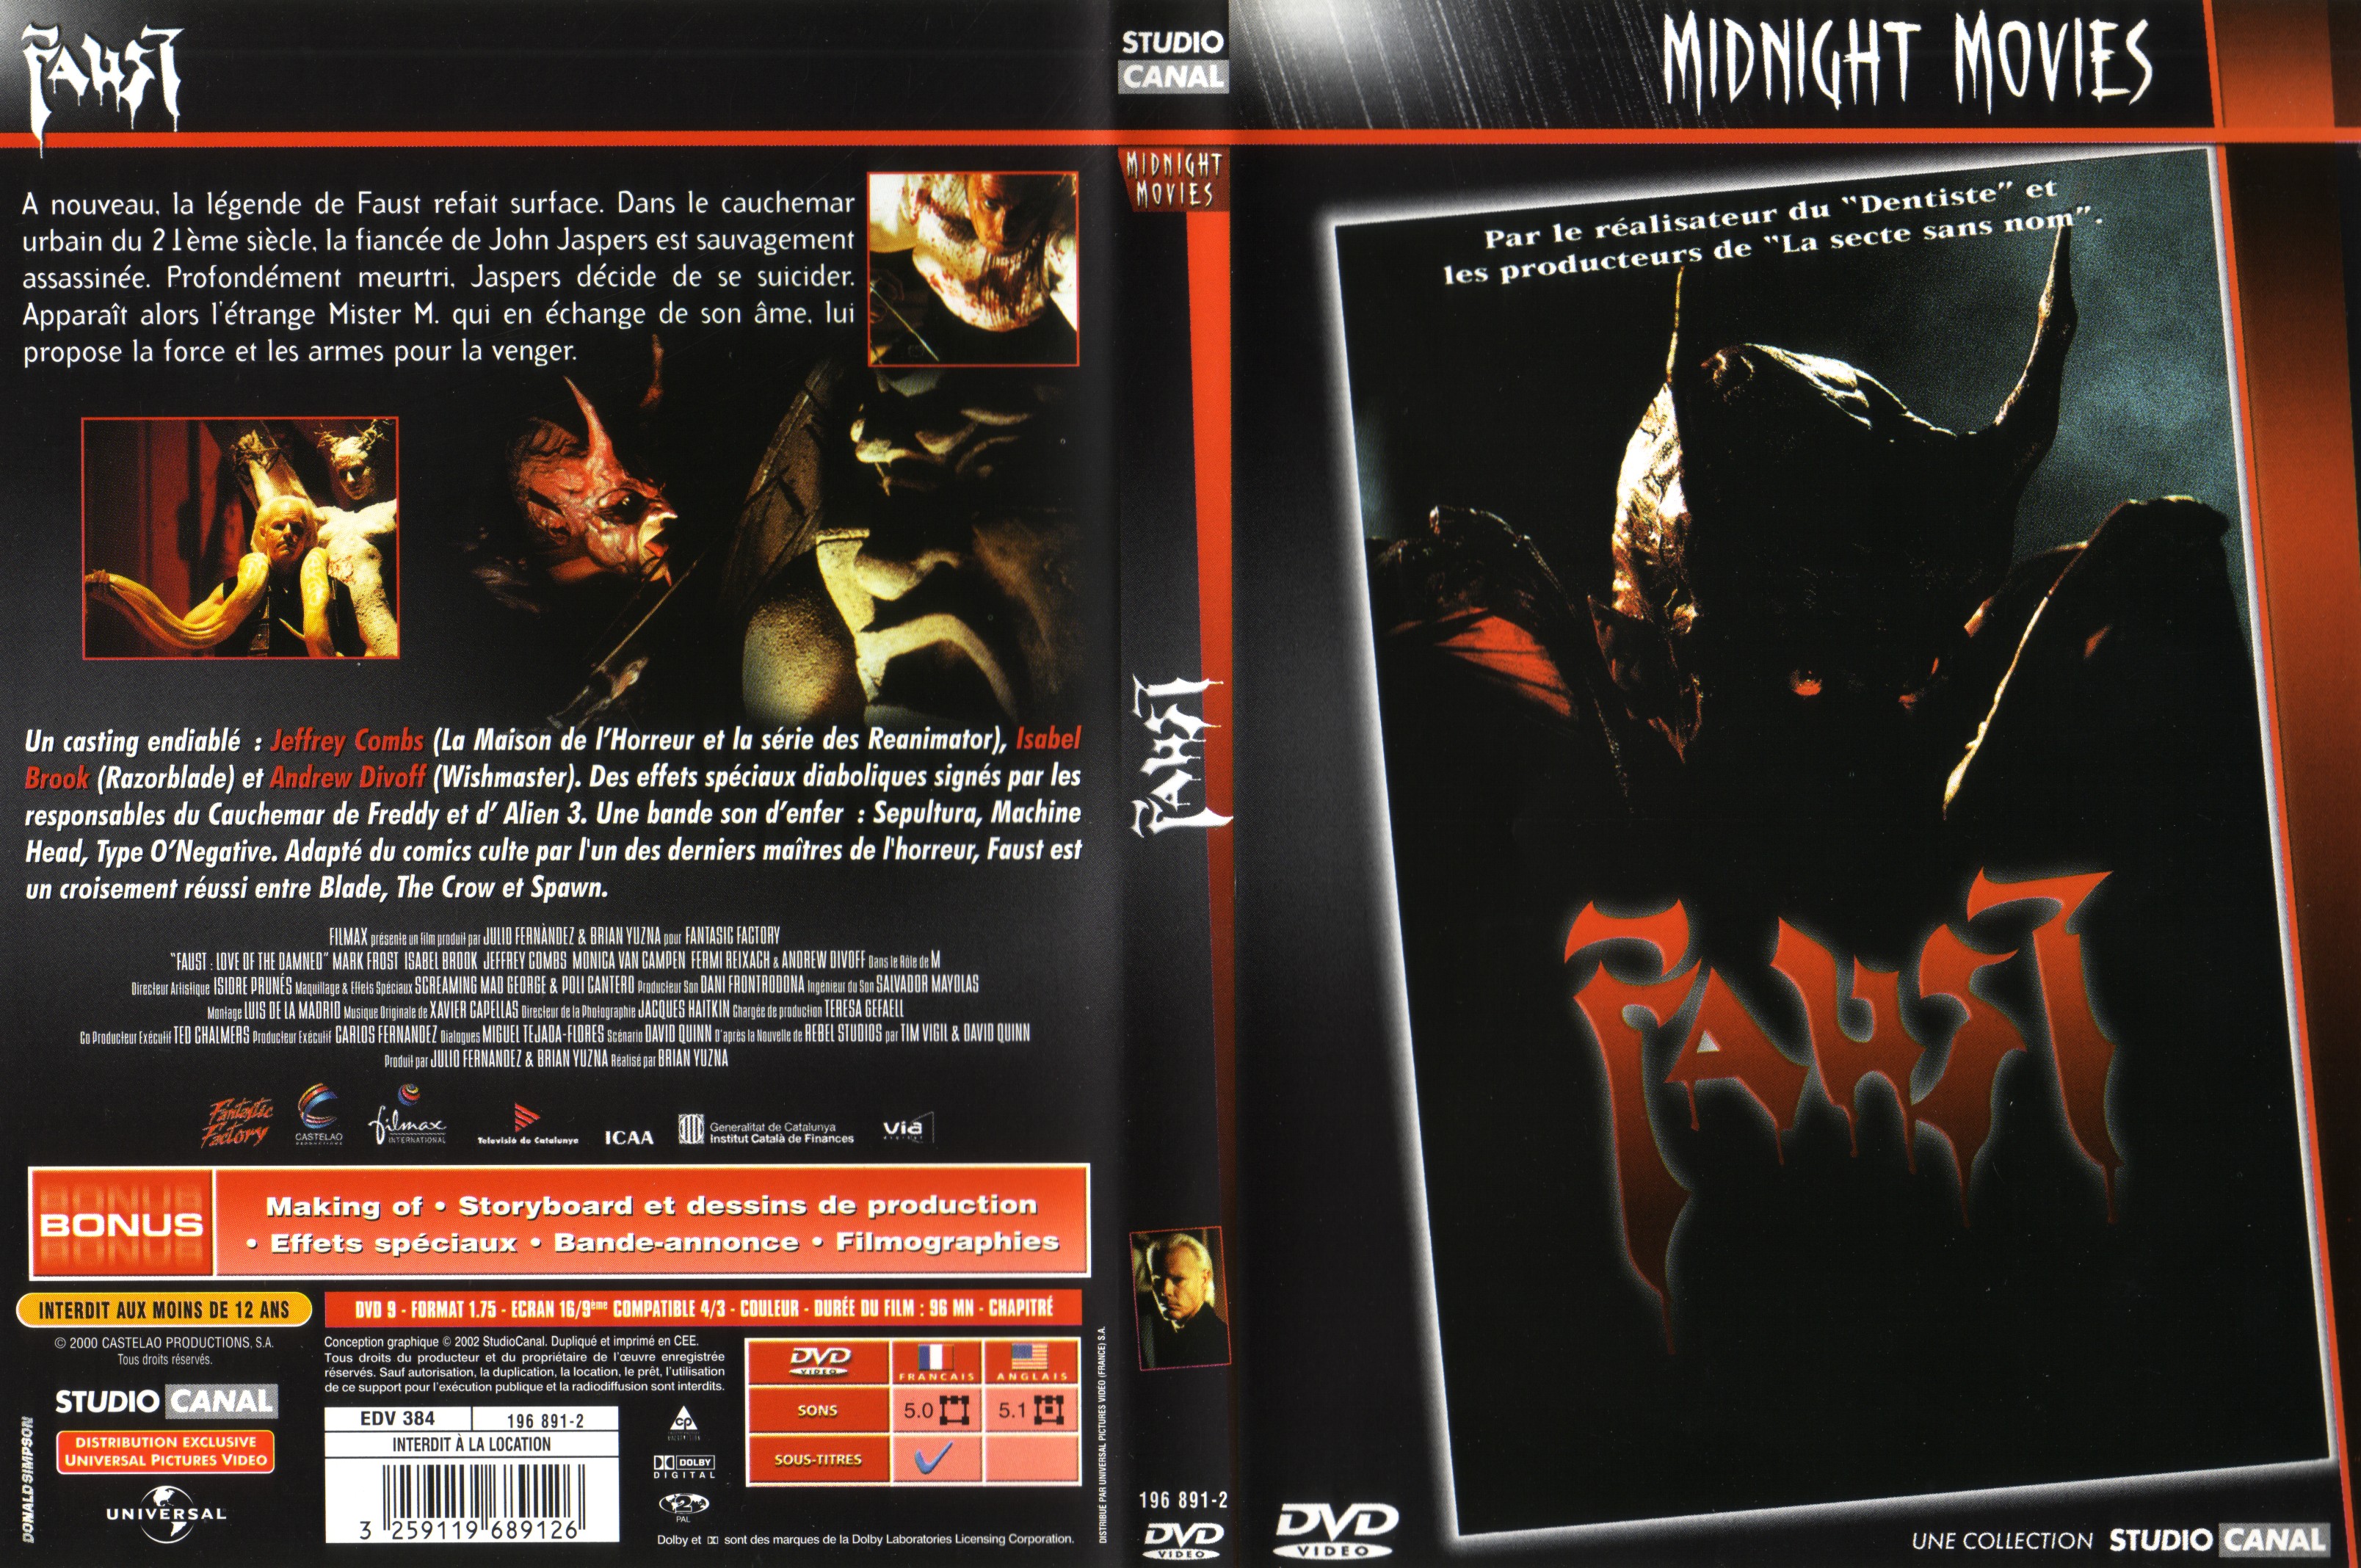 Jaquette DVD Faust